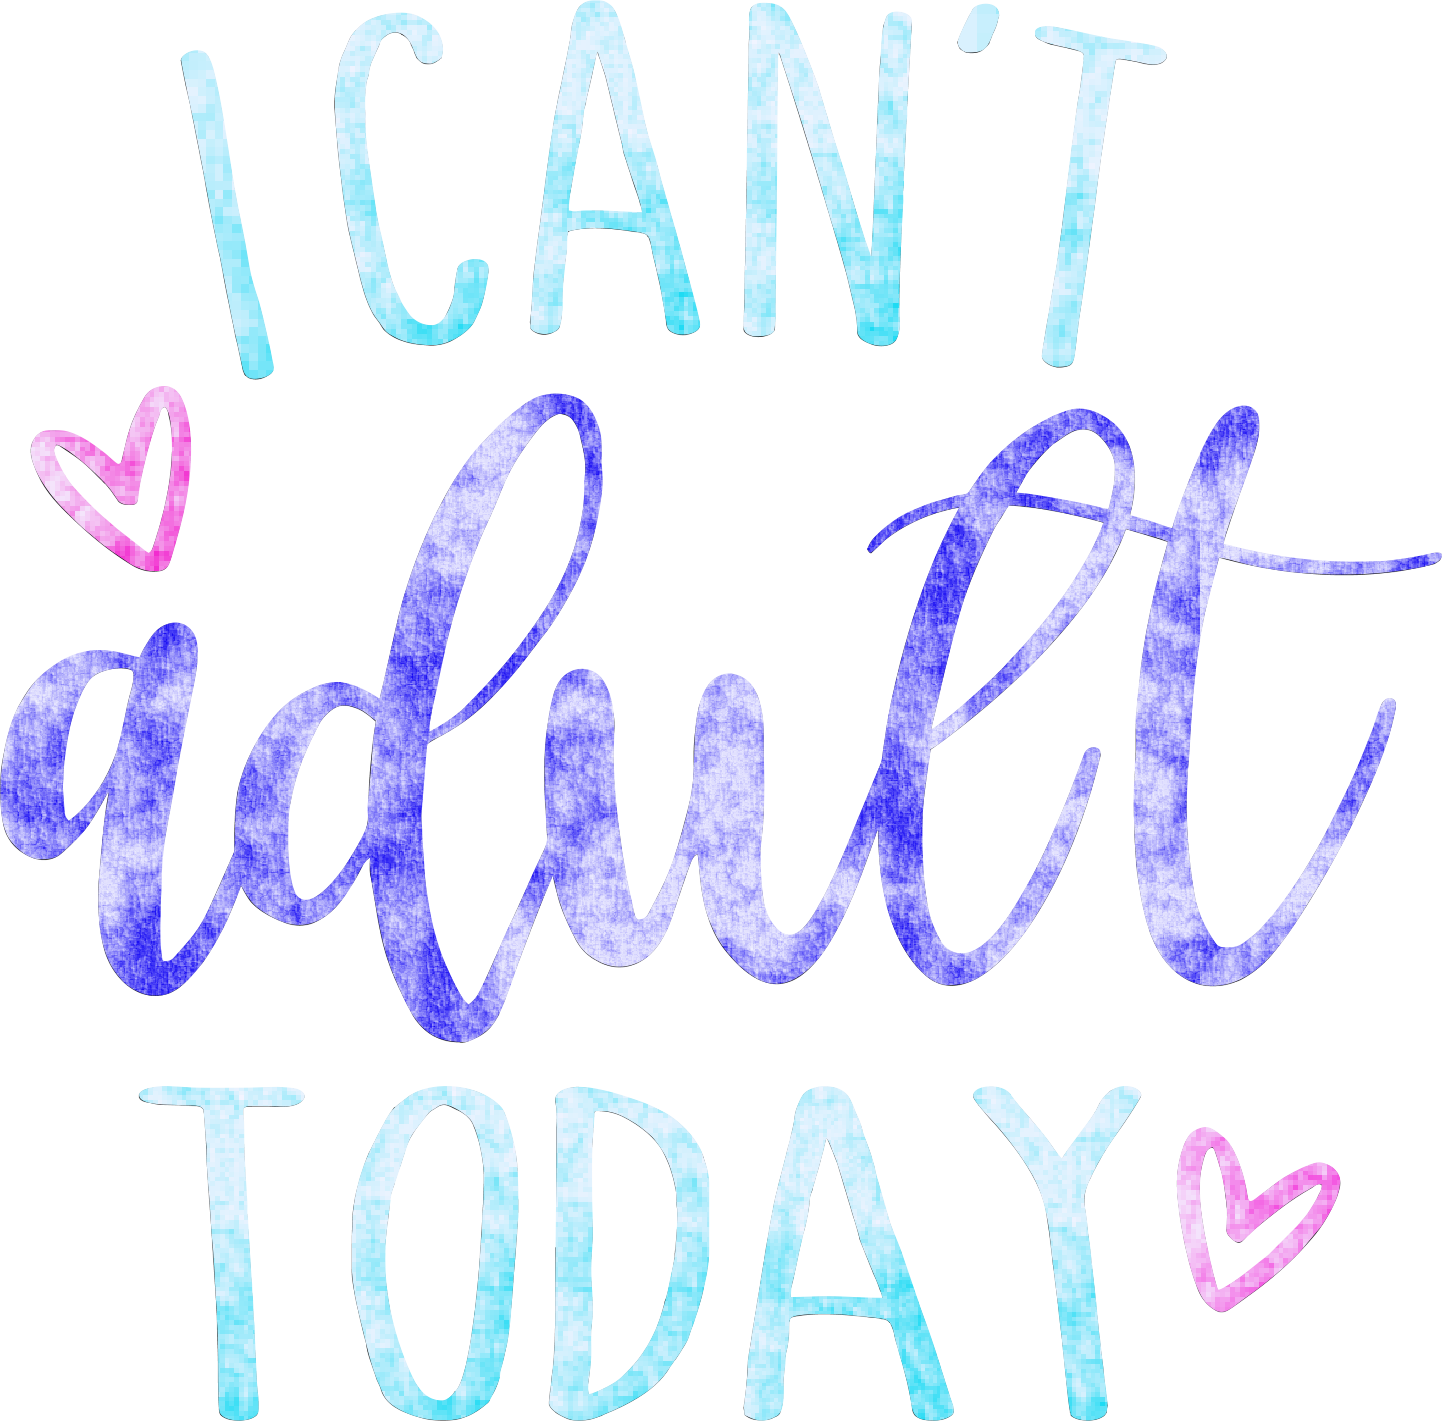 I Can't Adult Today - 6926